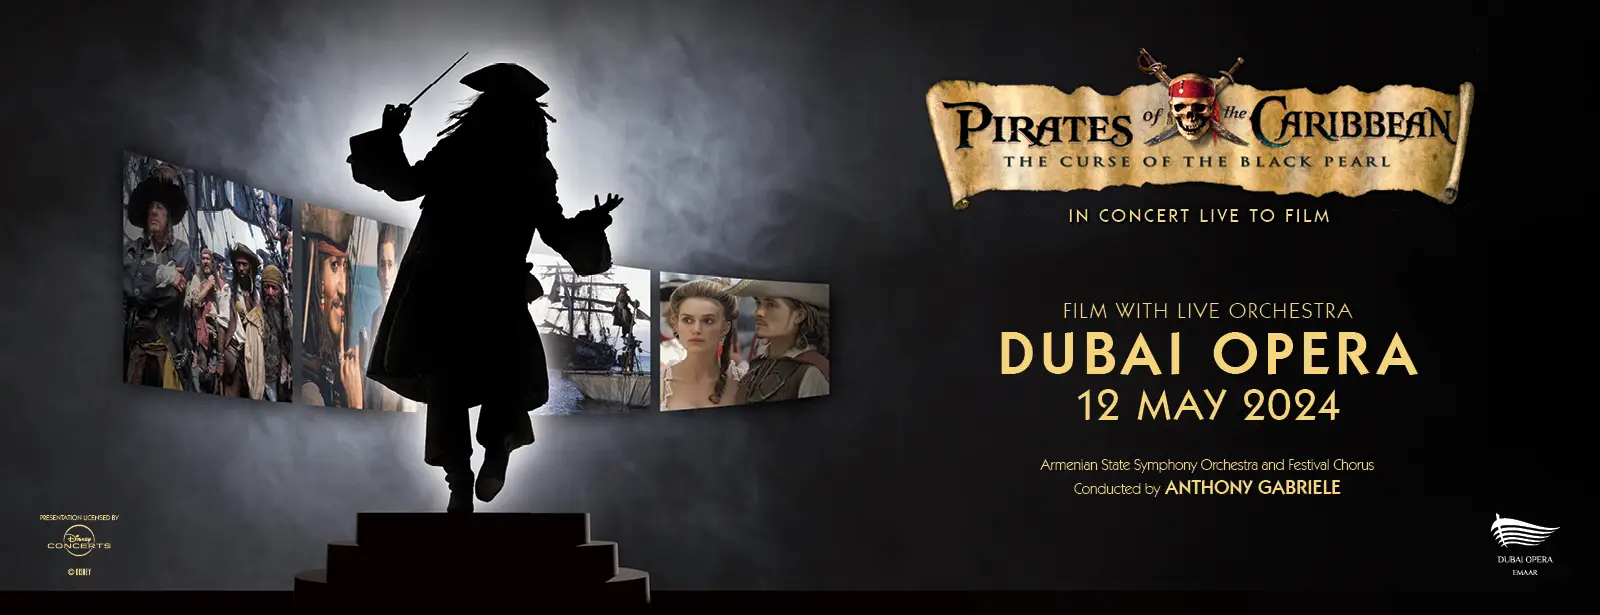 Pirates of the Caribbean: The Curse of the Black Pearl Live in Concert at Dubai Opera || Wow-Emirates